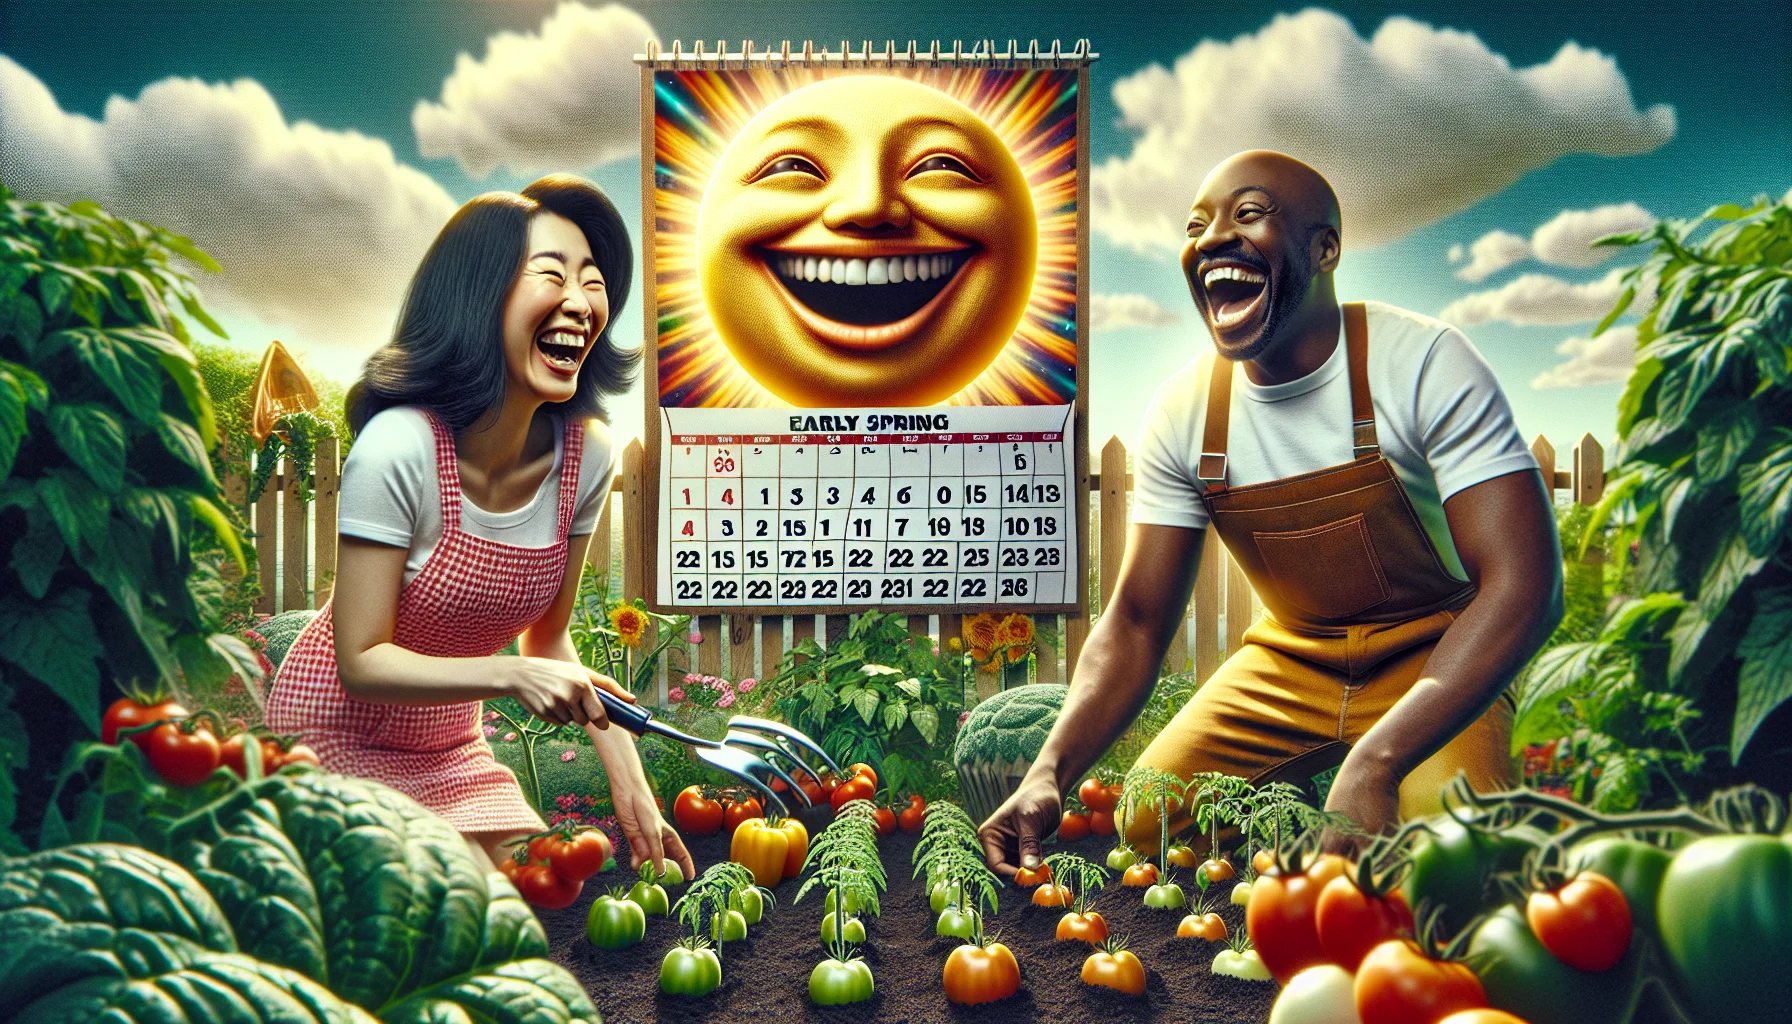 A humorous and realistic montage depicting the ideal time to plant tomatoes. In the foreground, a South Asian woman and a Black man laugh heartily as they plant tomato seedlings in a lusciously verdant garden. Behind them, a large illustrated calendar hangs on the garden fence, proudly revealing that it's early Spring - the best time to plant tomatoes. The sun, anthropomorphized with a grinning face, playfully peeks out from behind the clouds, casting soft, glowing light on the scene. The energetic vibe of the scene encourages the viewers to participate and cultivate the joy of gardening.